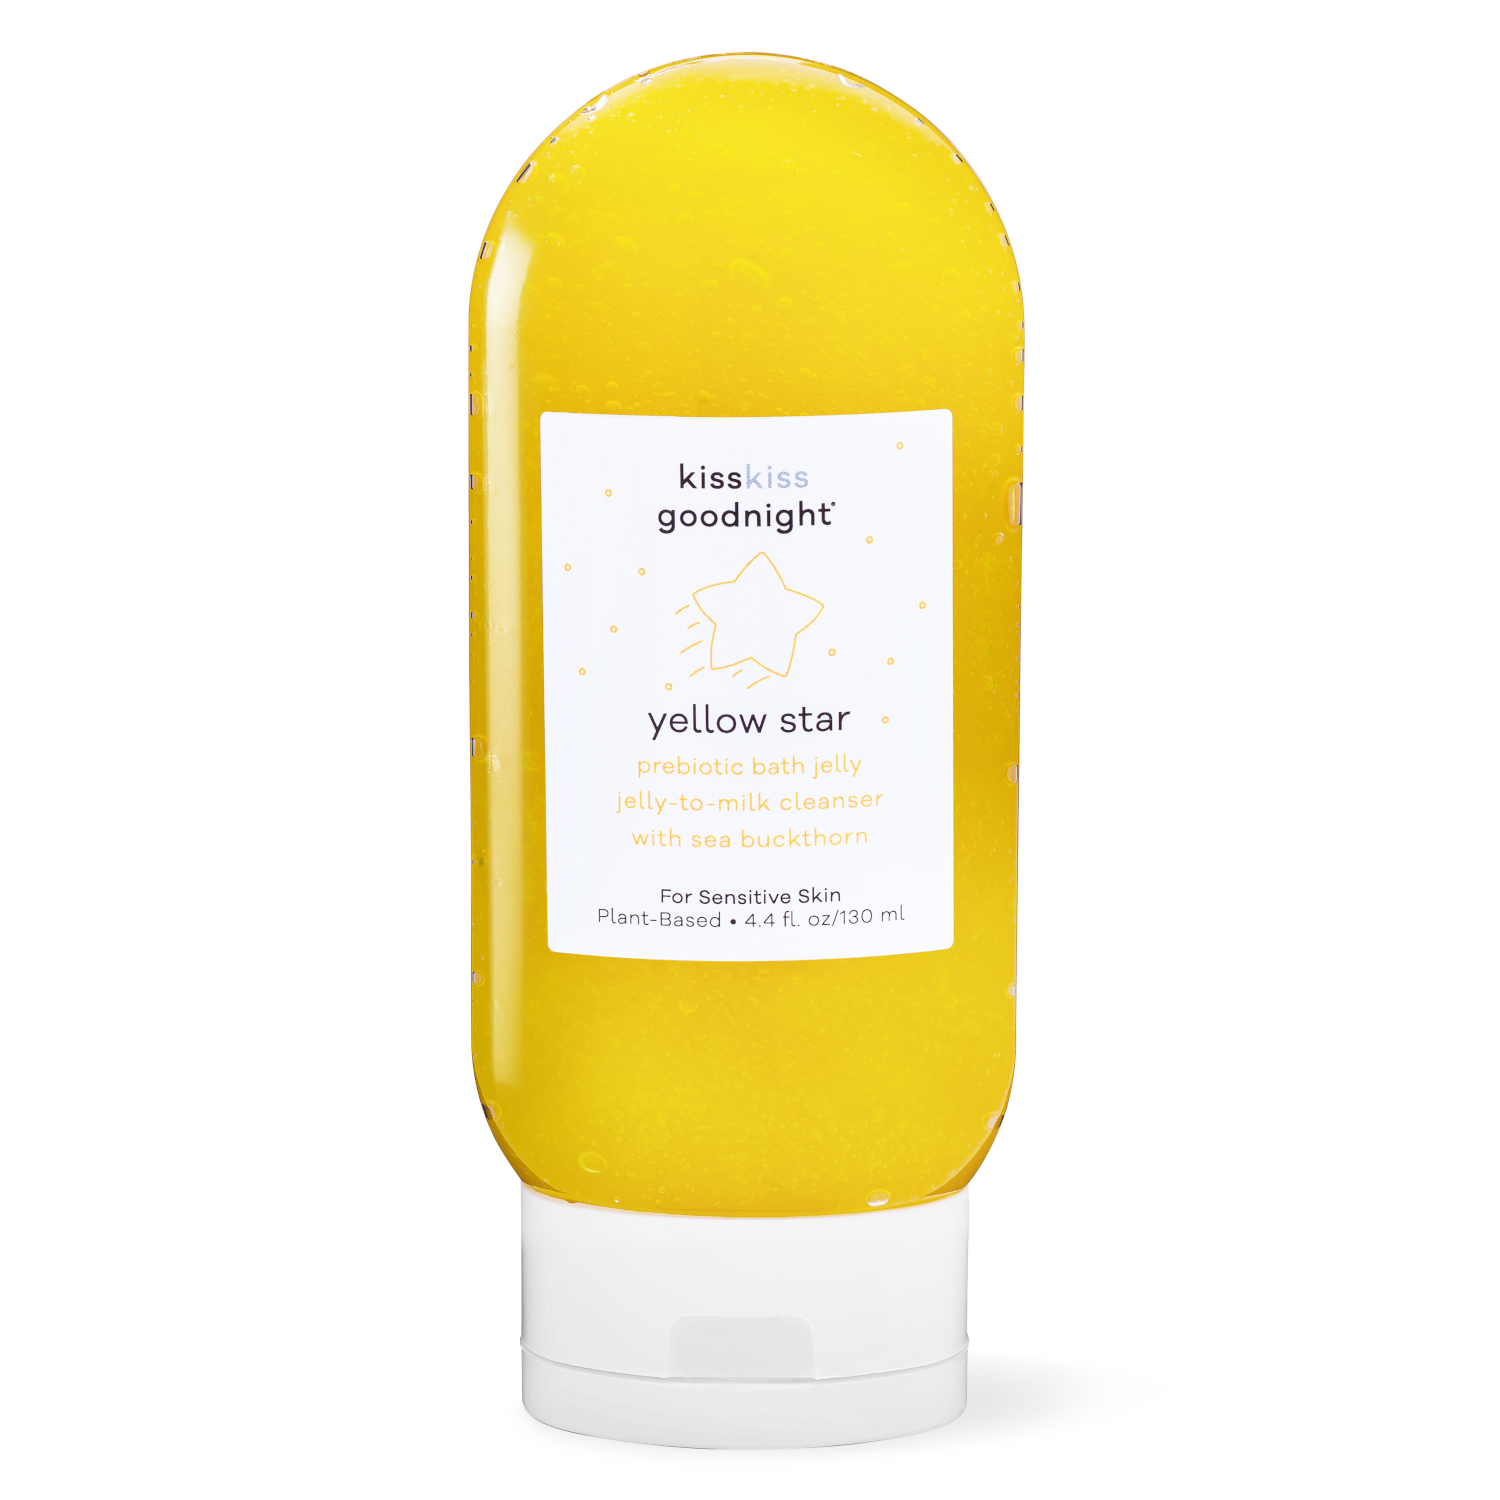 yellow star prebiotic jelly-to-milk cleanser